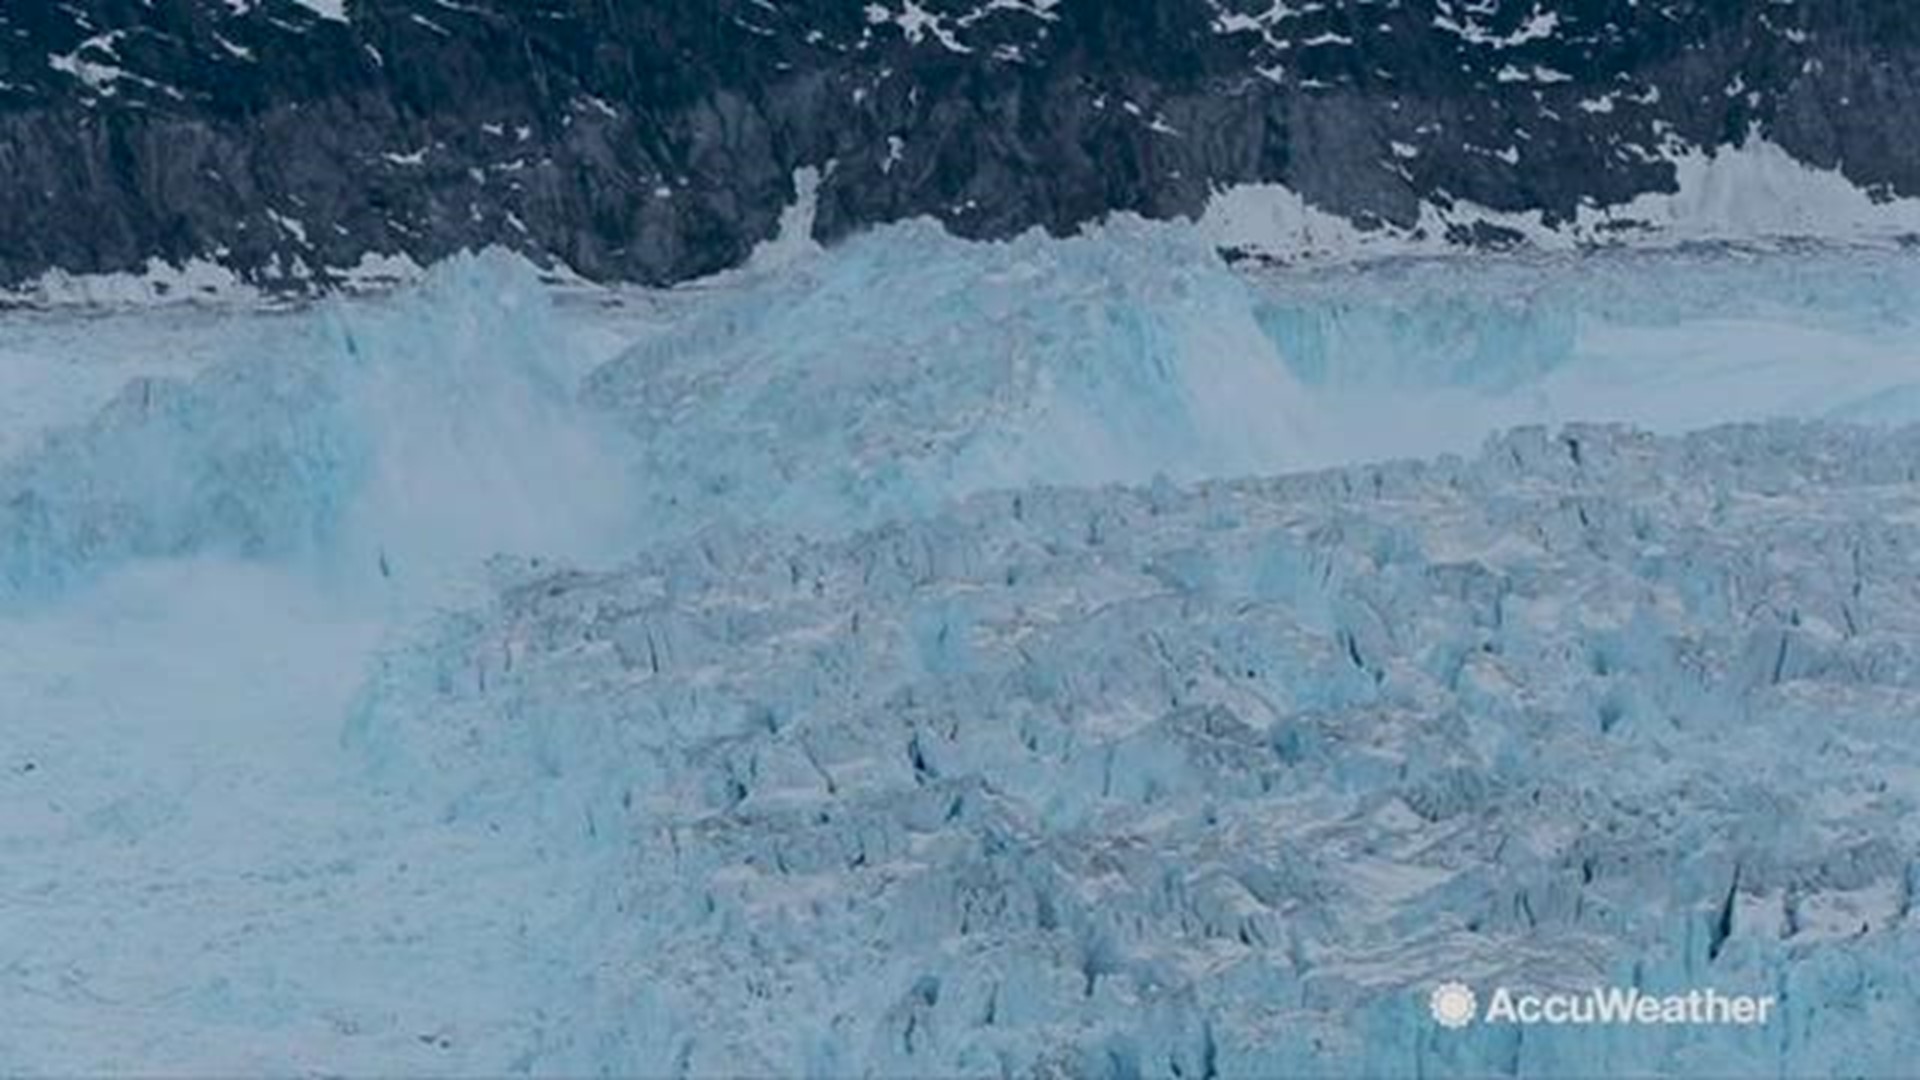 Time-lapse video shows a four-mile wide chunk of ice breaking away from the Helheim Glacier in Tasiilaq, Greenland, a rarely documented event called calving.